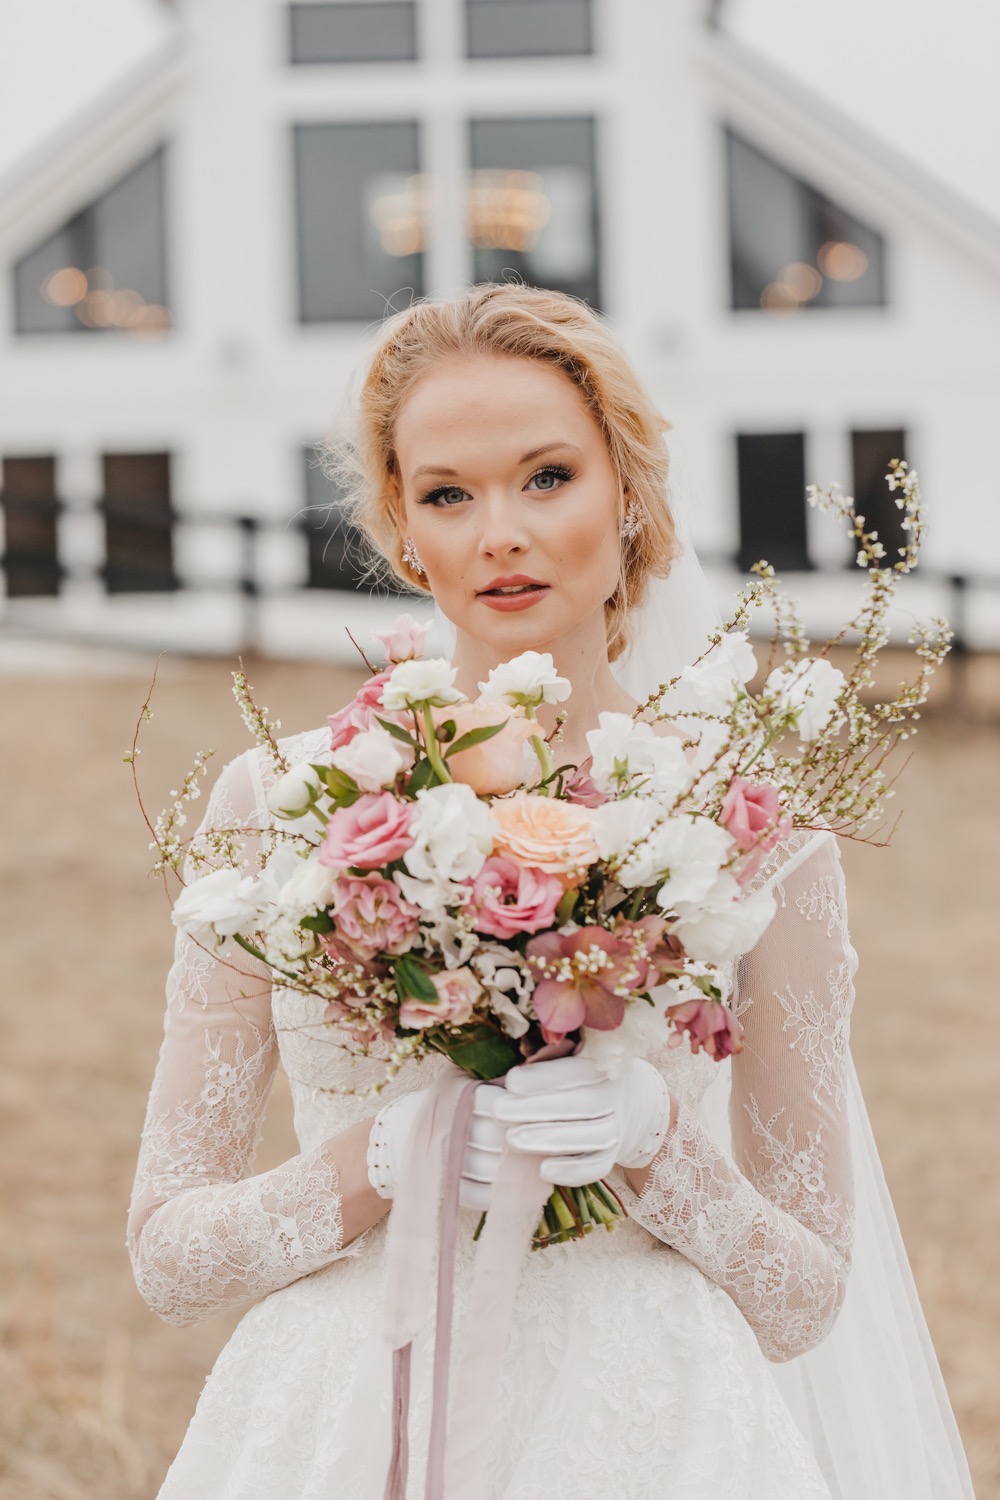 Bride looking intensely at the camera and holding up her floral bouquet at Barn at Willow Brook, taken by Rachel Yearick Photography